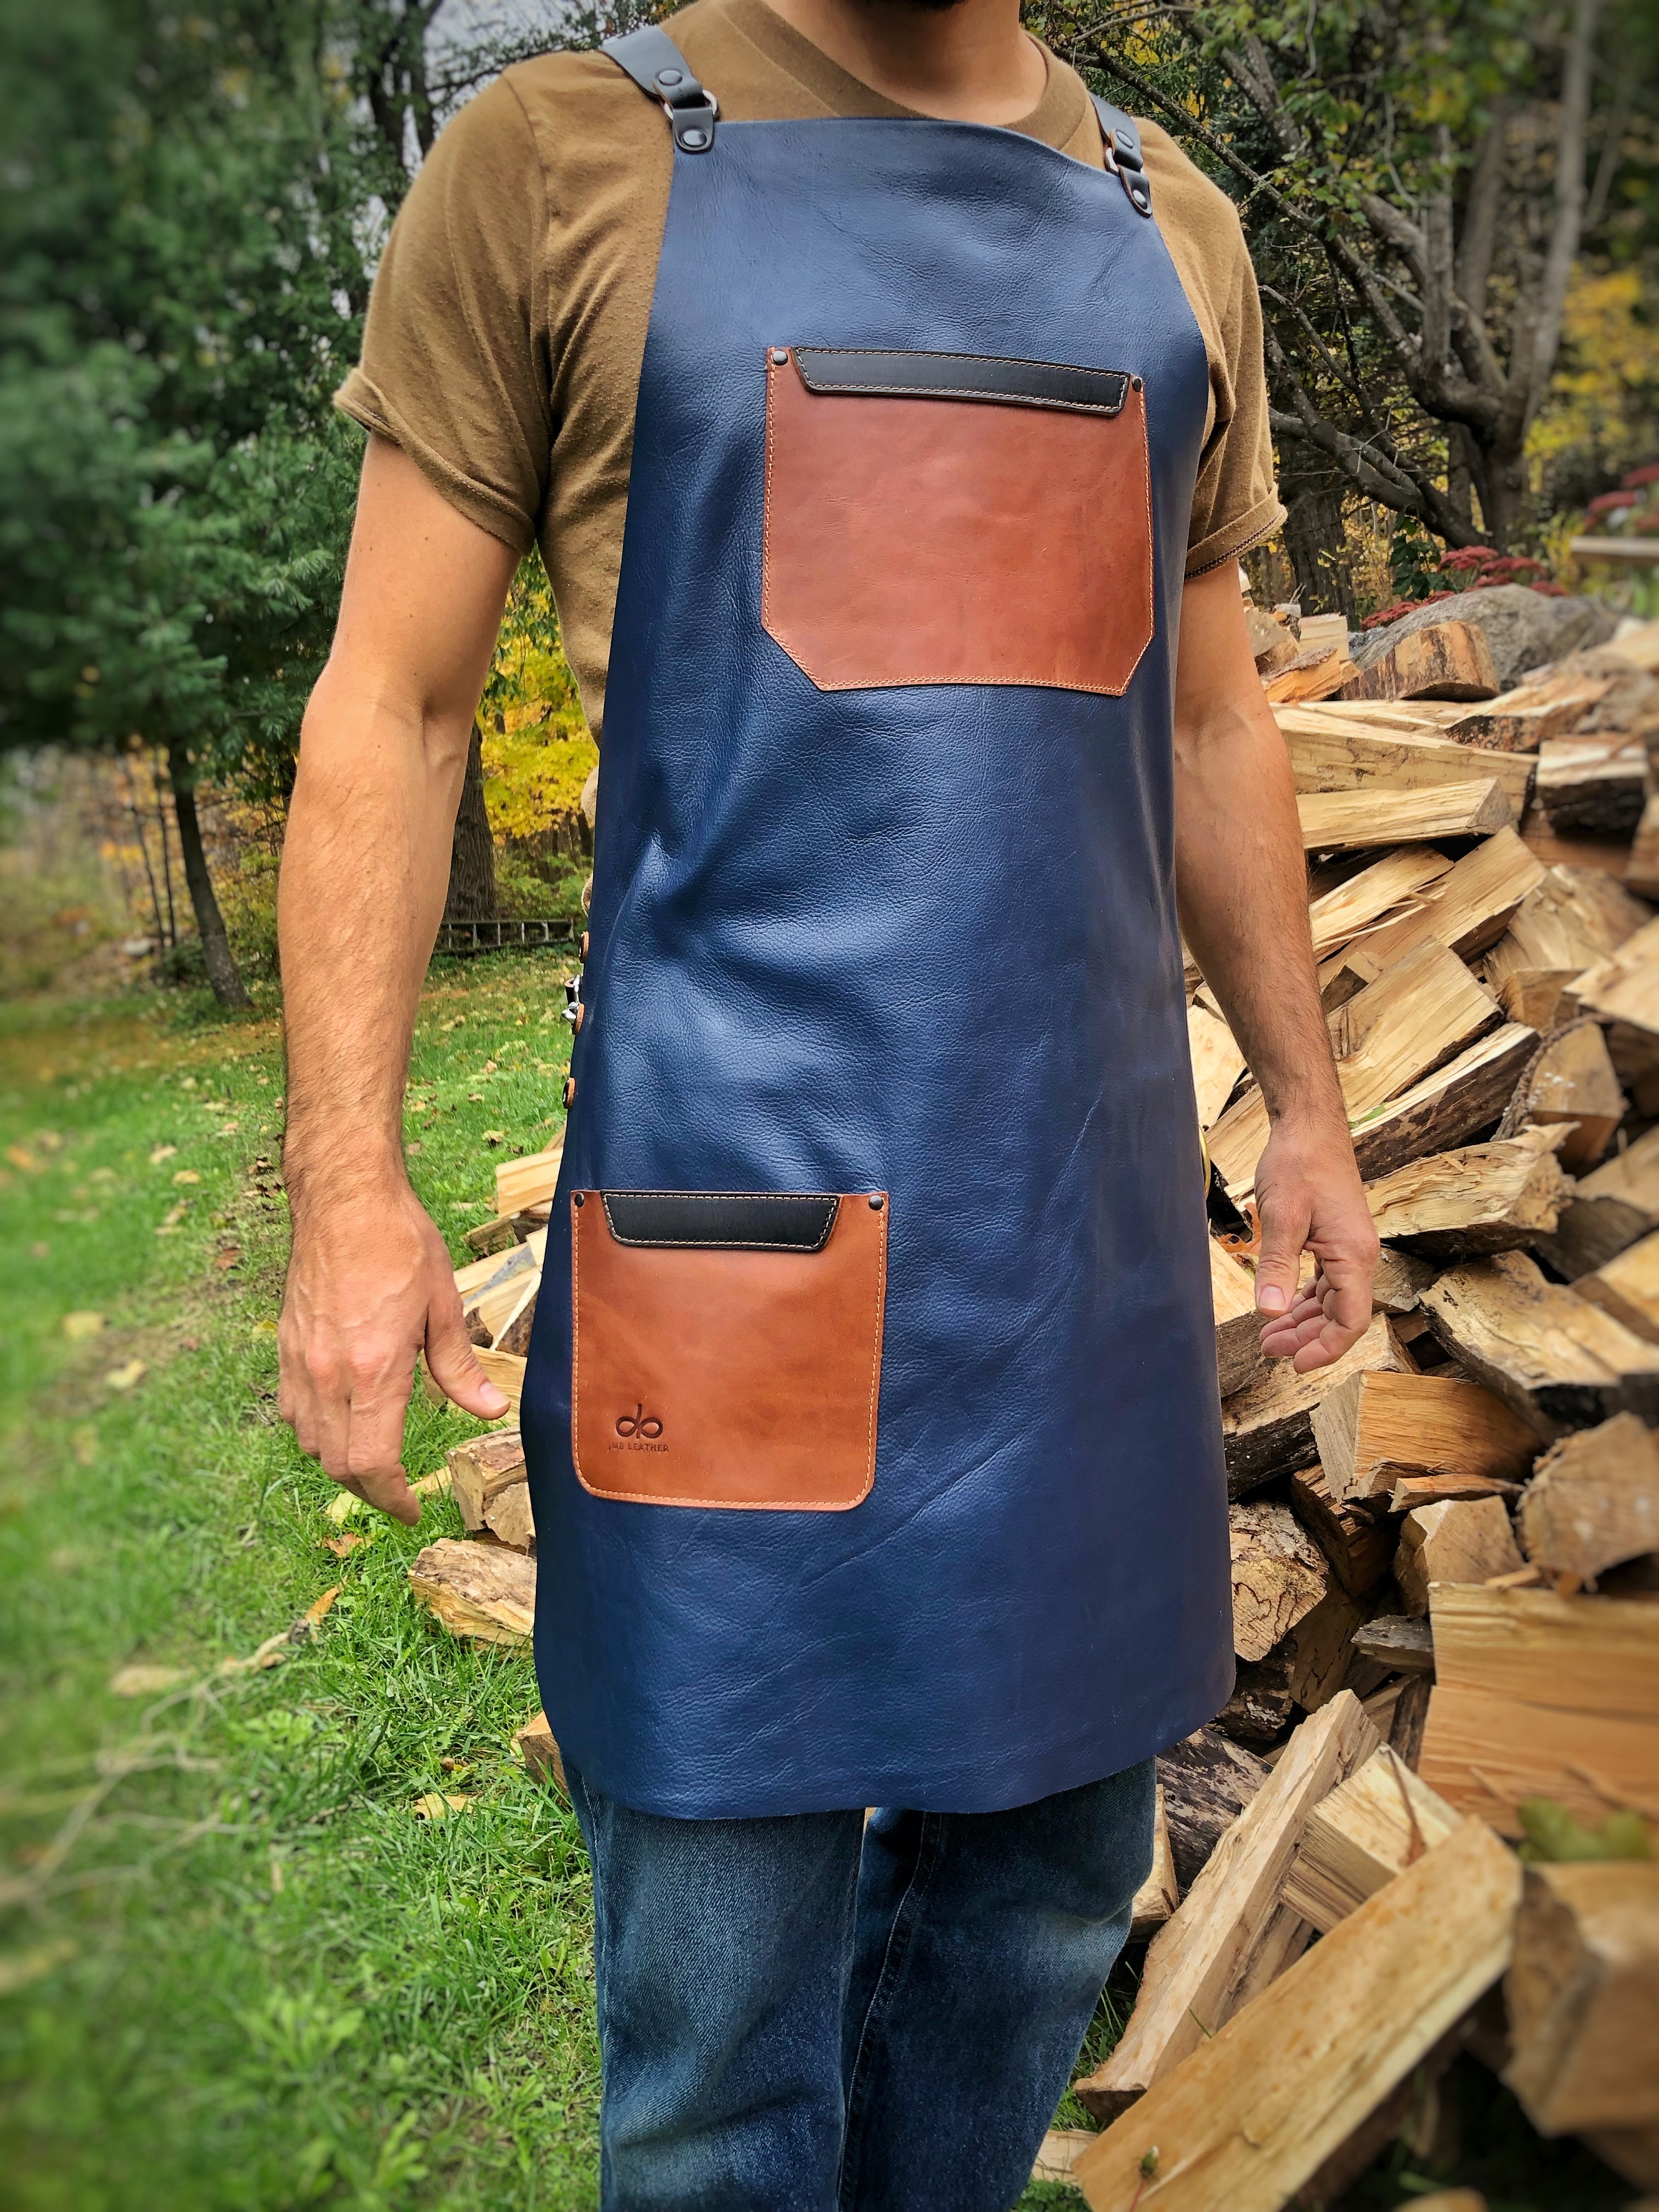 Coffee Black Long Denim Barista Apron With Cross-back Leather | Etsy Canada  | Barista outfits, Womens aprons, Aprons for men